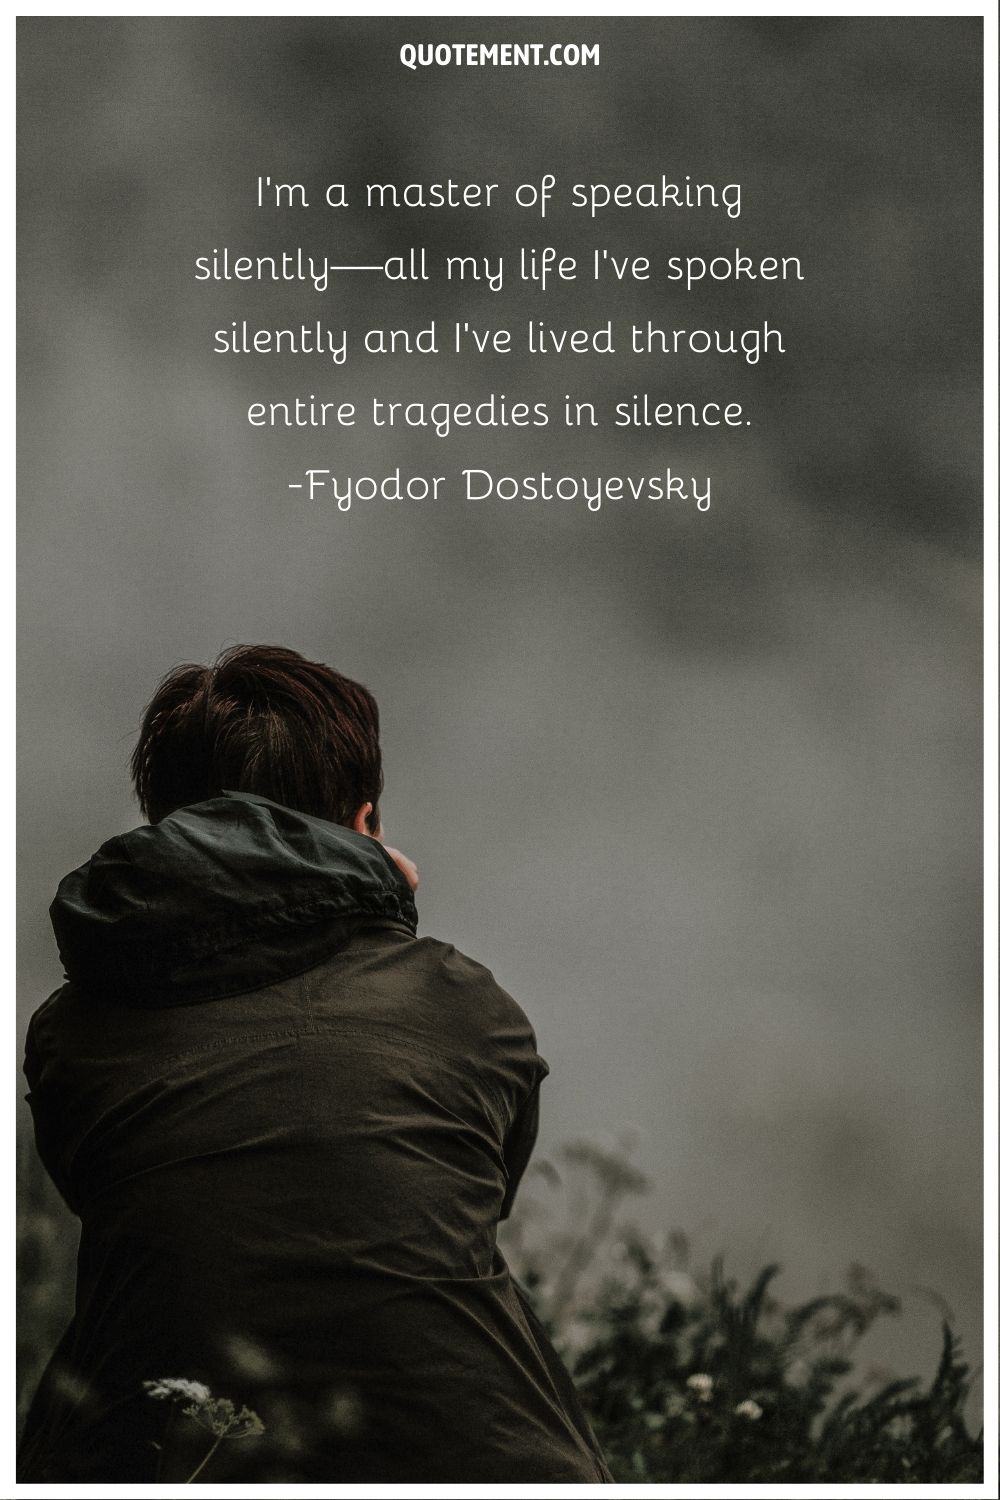 “I'm a master of speaking silently—all my life I've spoken silently and I've lived through entire tragedies in silence.” ― Fyodor Dostoyevsky, The Gentle Spirit